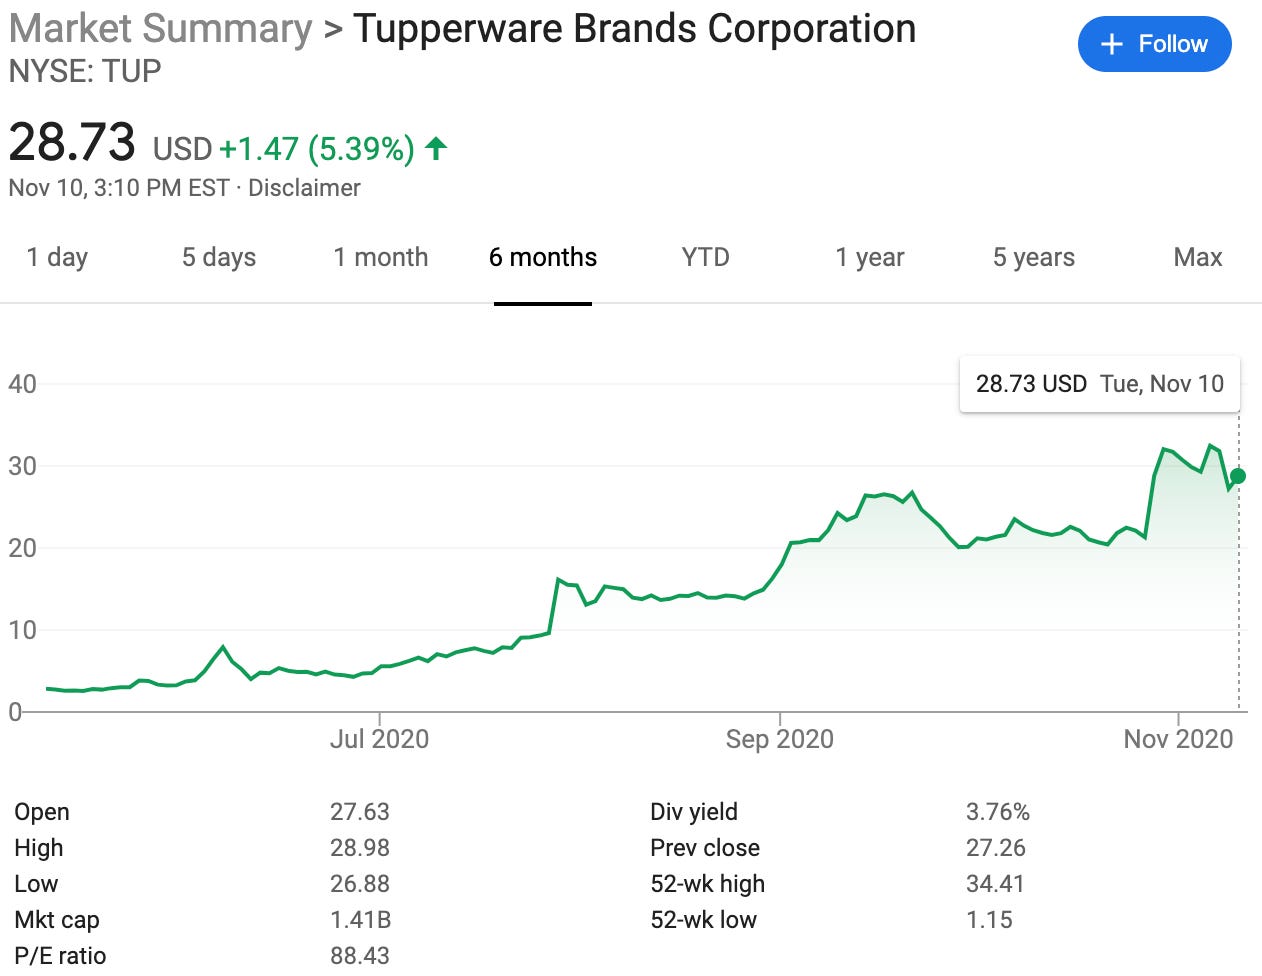 TUP Stock Gains 10% as Tupperware Names New CEO